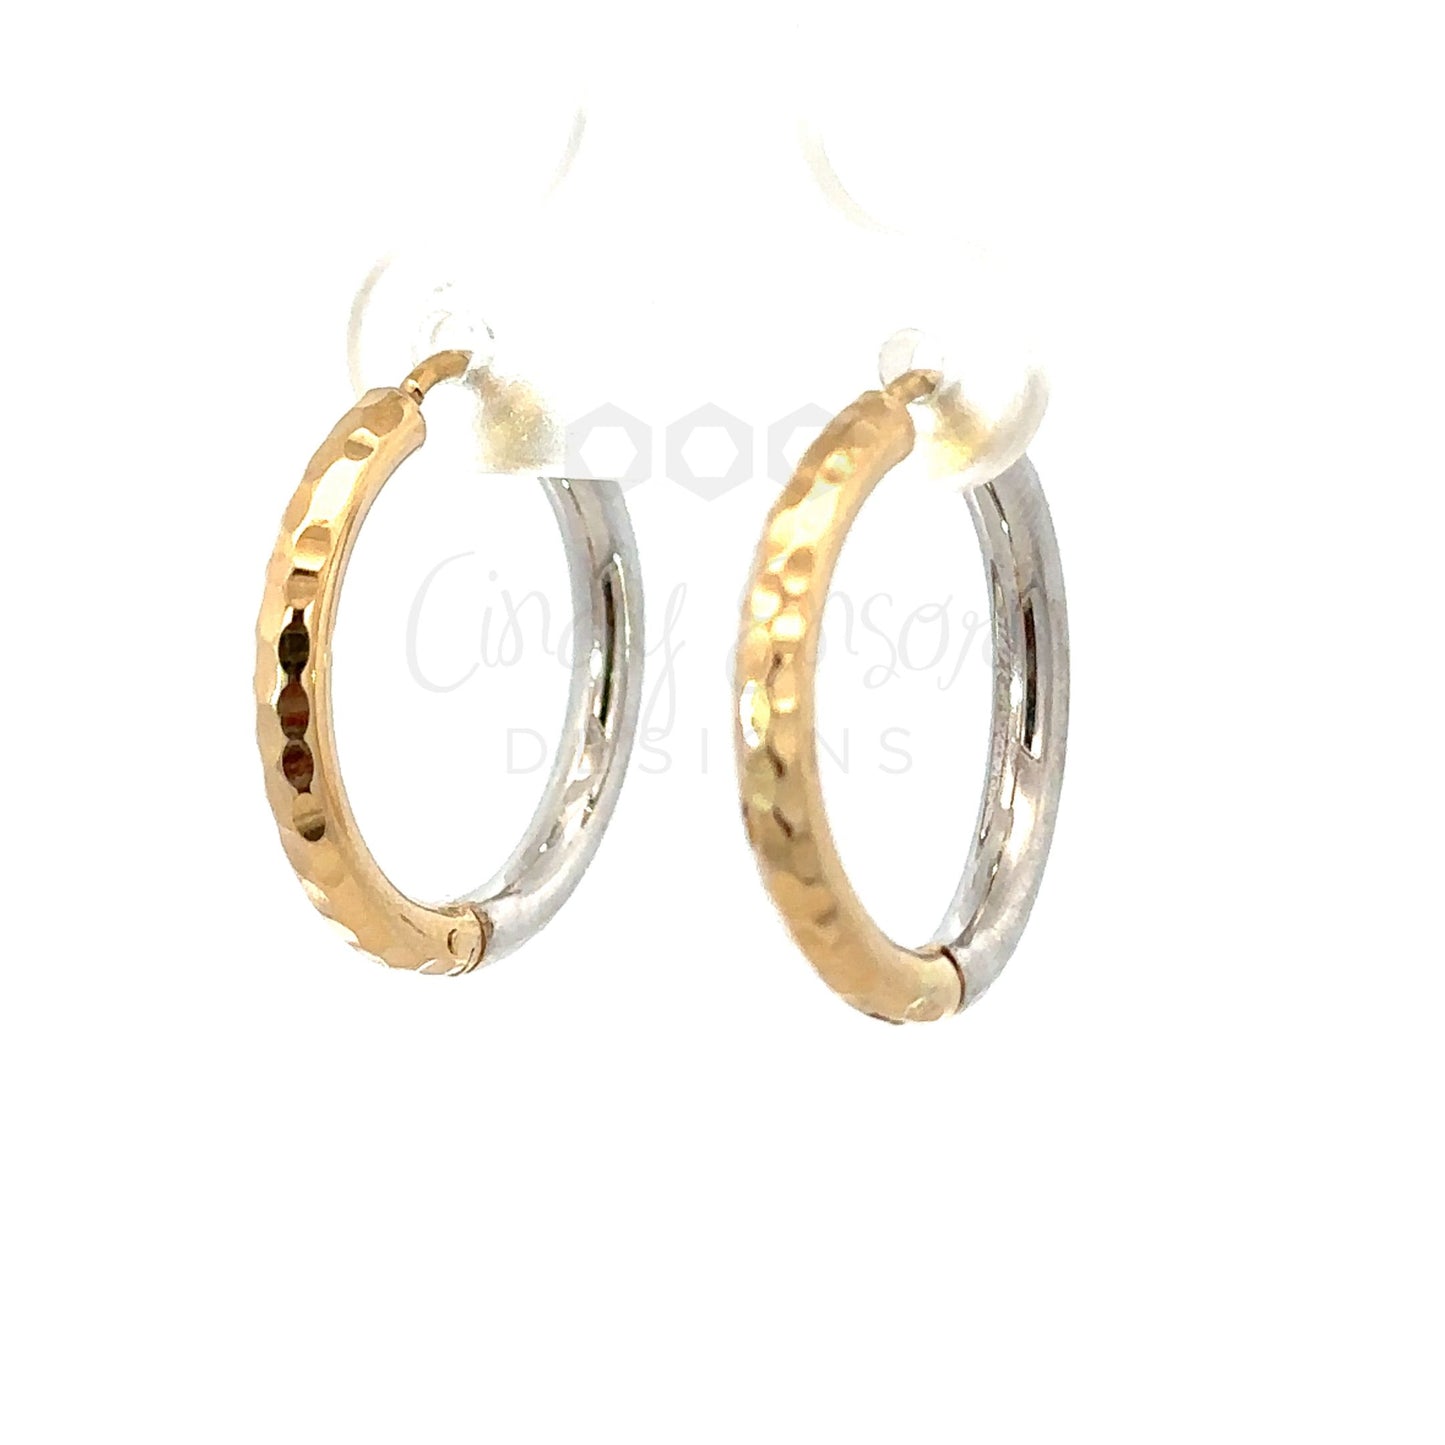 Yellow and White Gold Hammered Hoop Earring